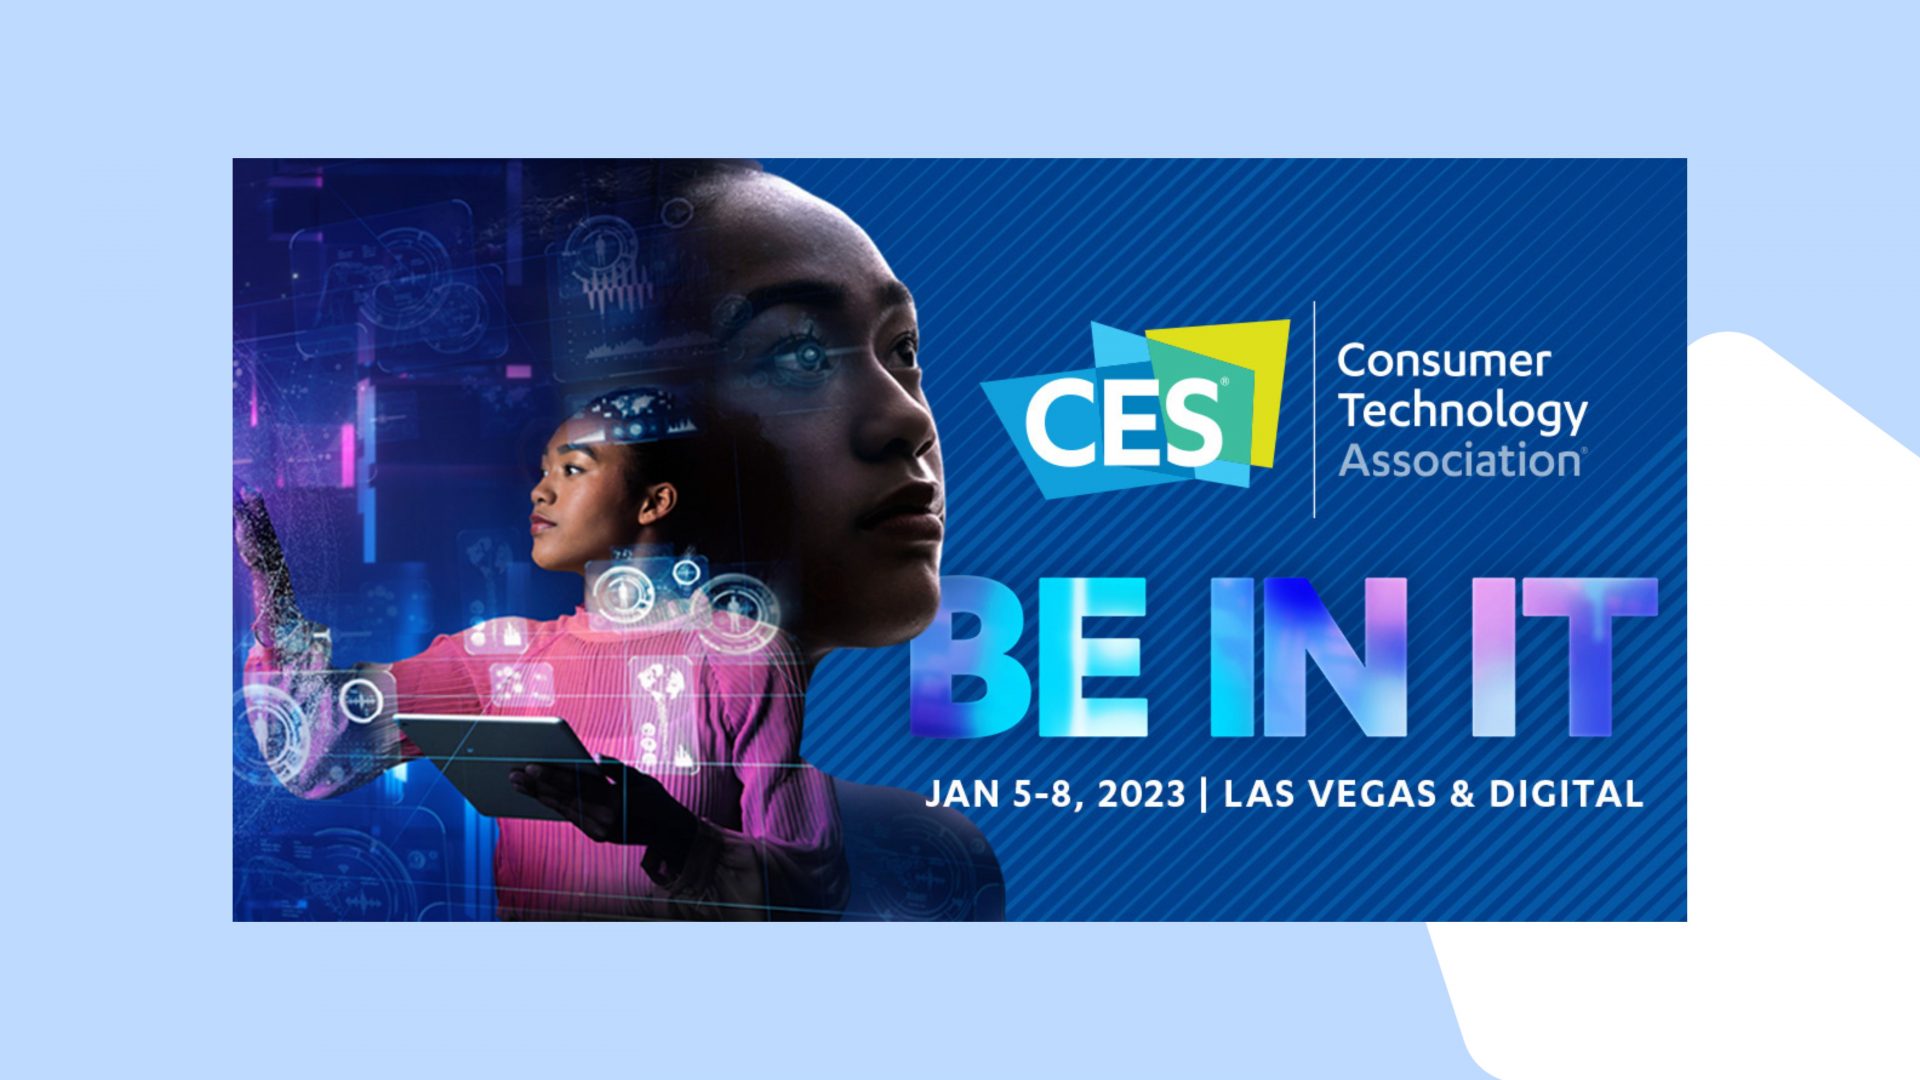 Our favorite launch exclusives from CES2023